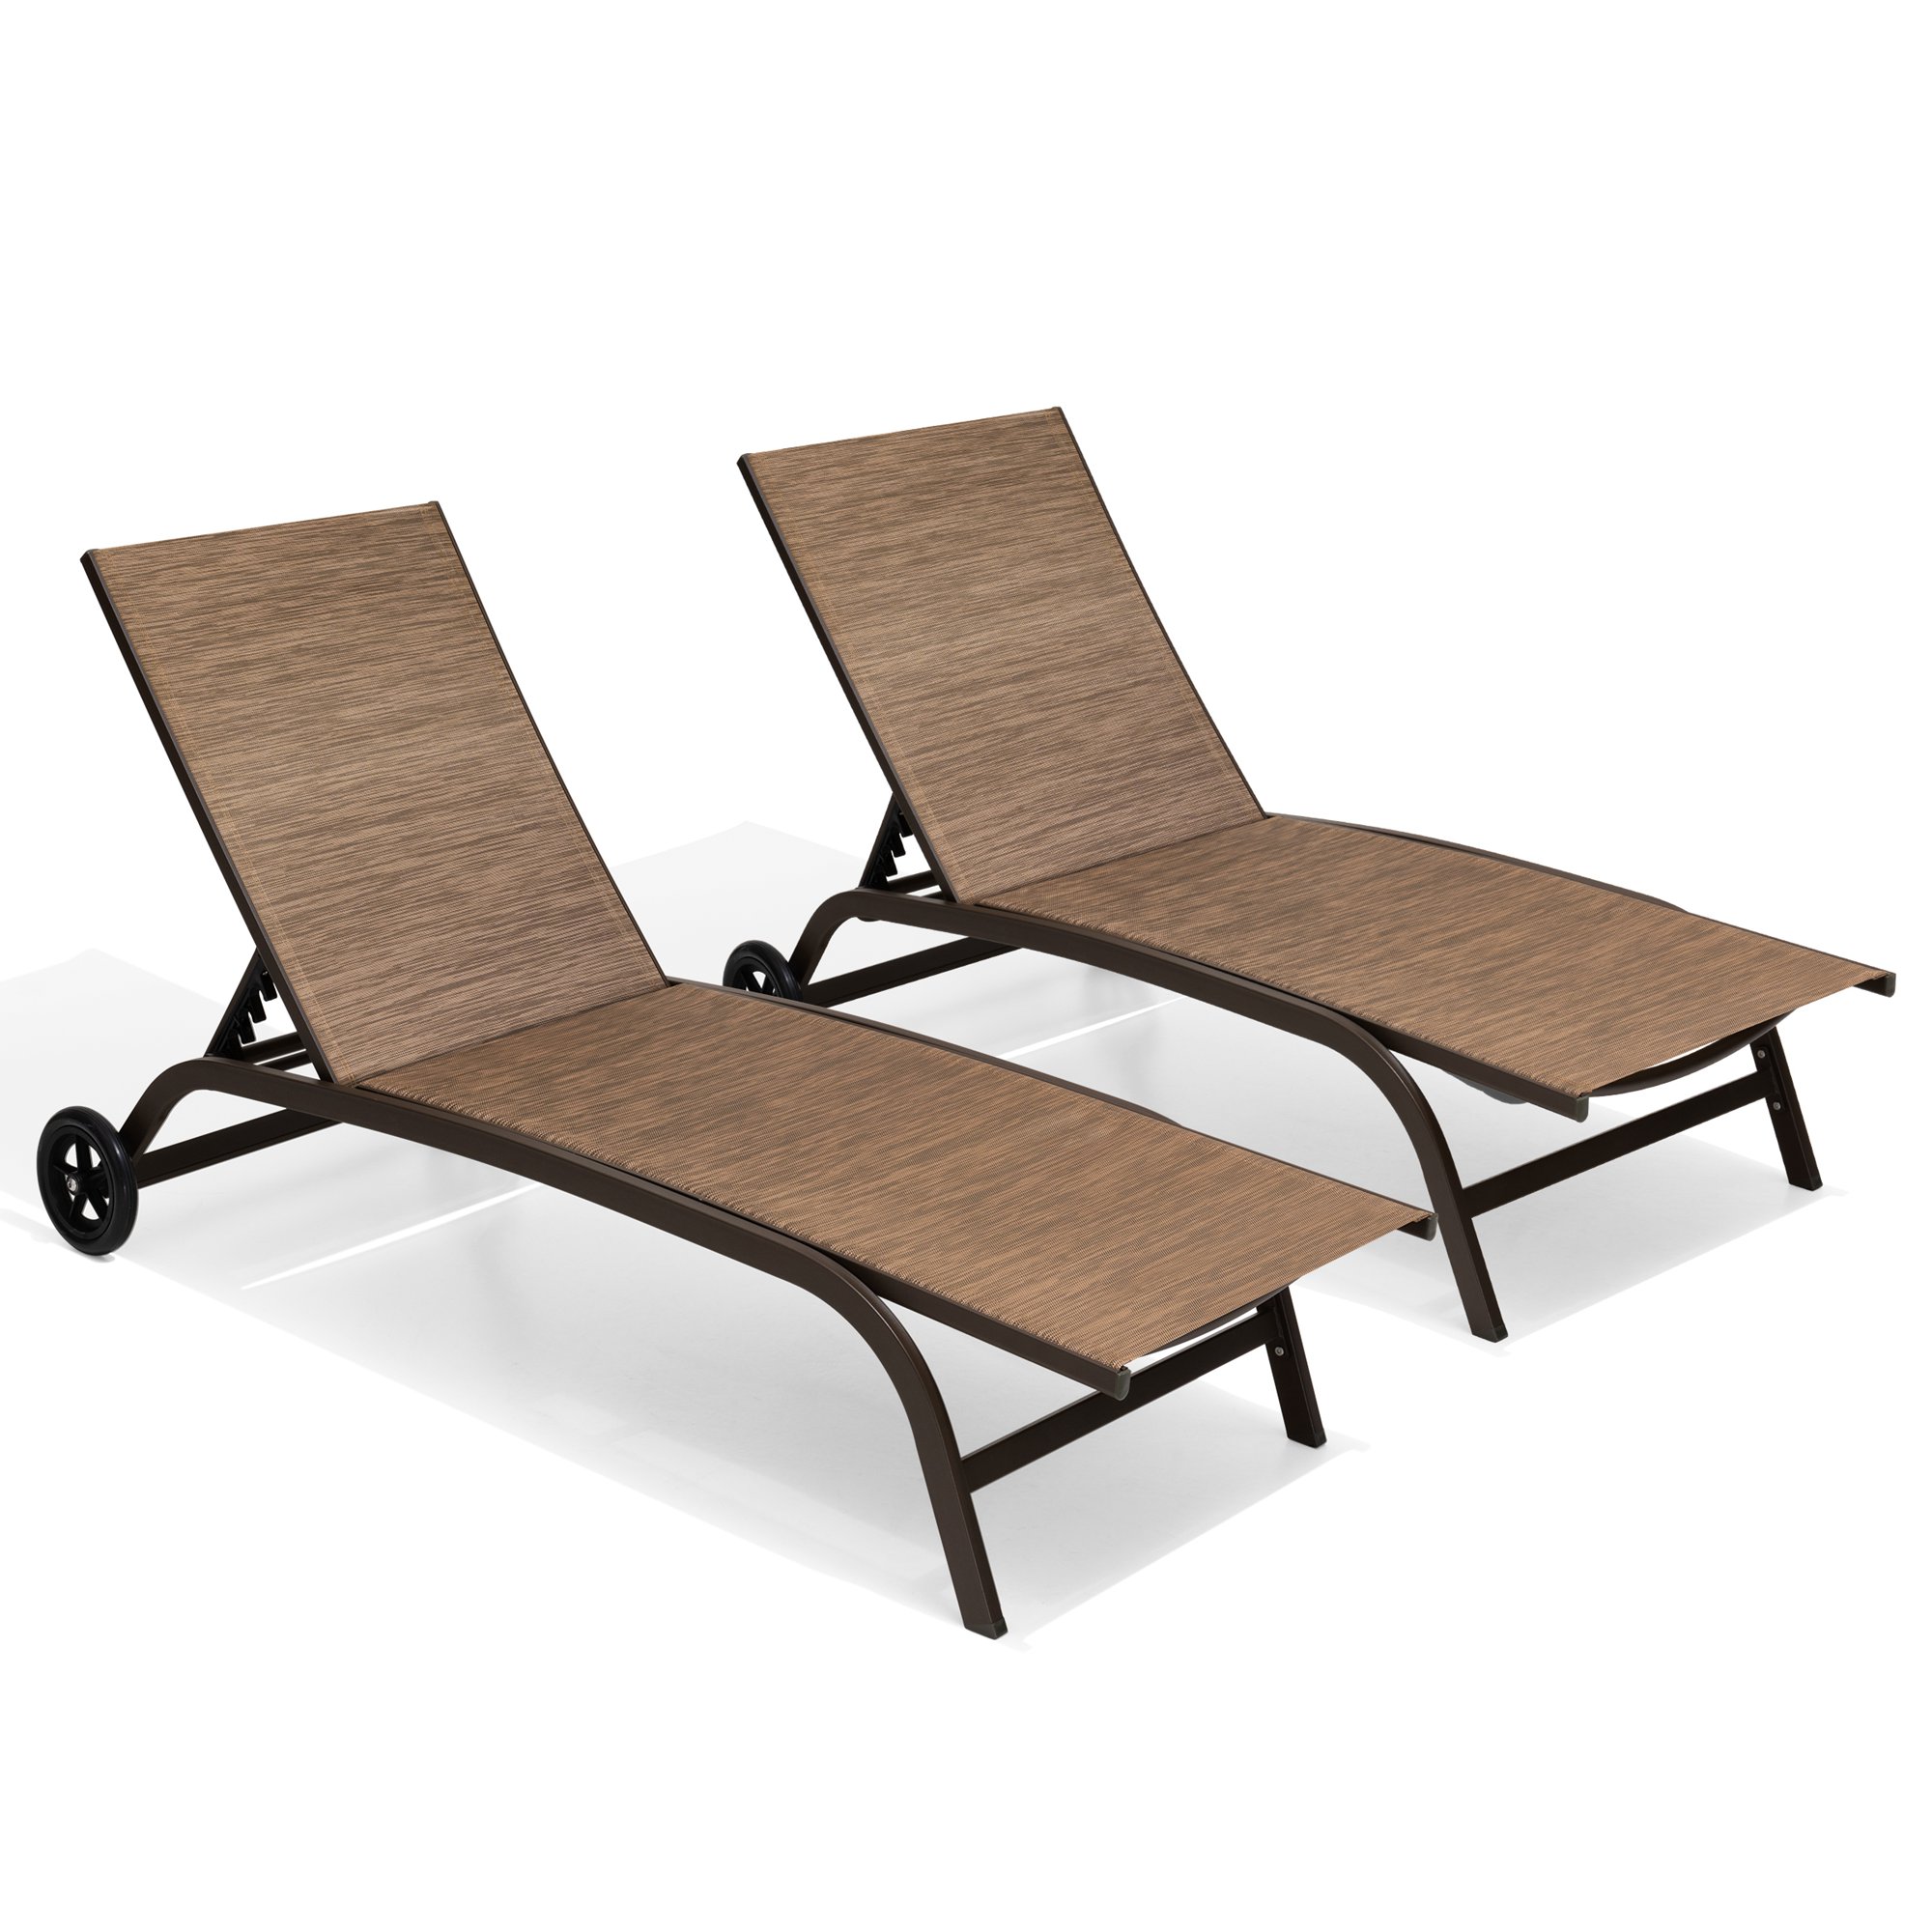 Crestlive Products Set of 2 Adjustable Aluminum Chaise Lounge Chairs & Wheels, Brown - image 1 of 8